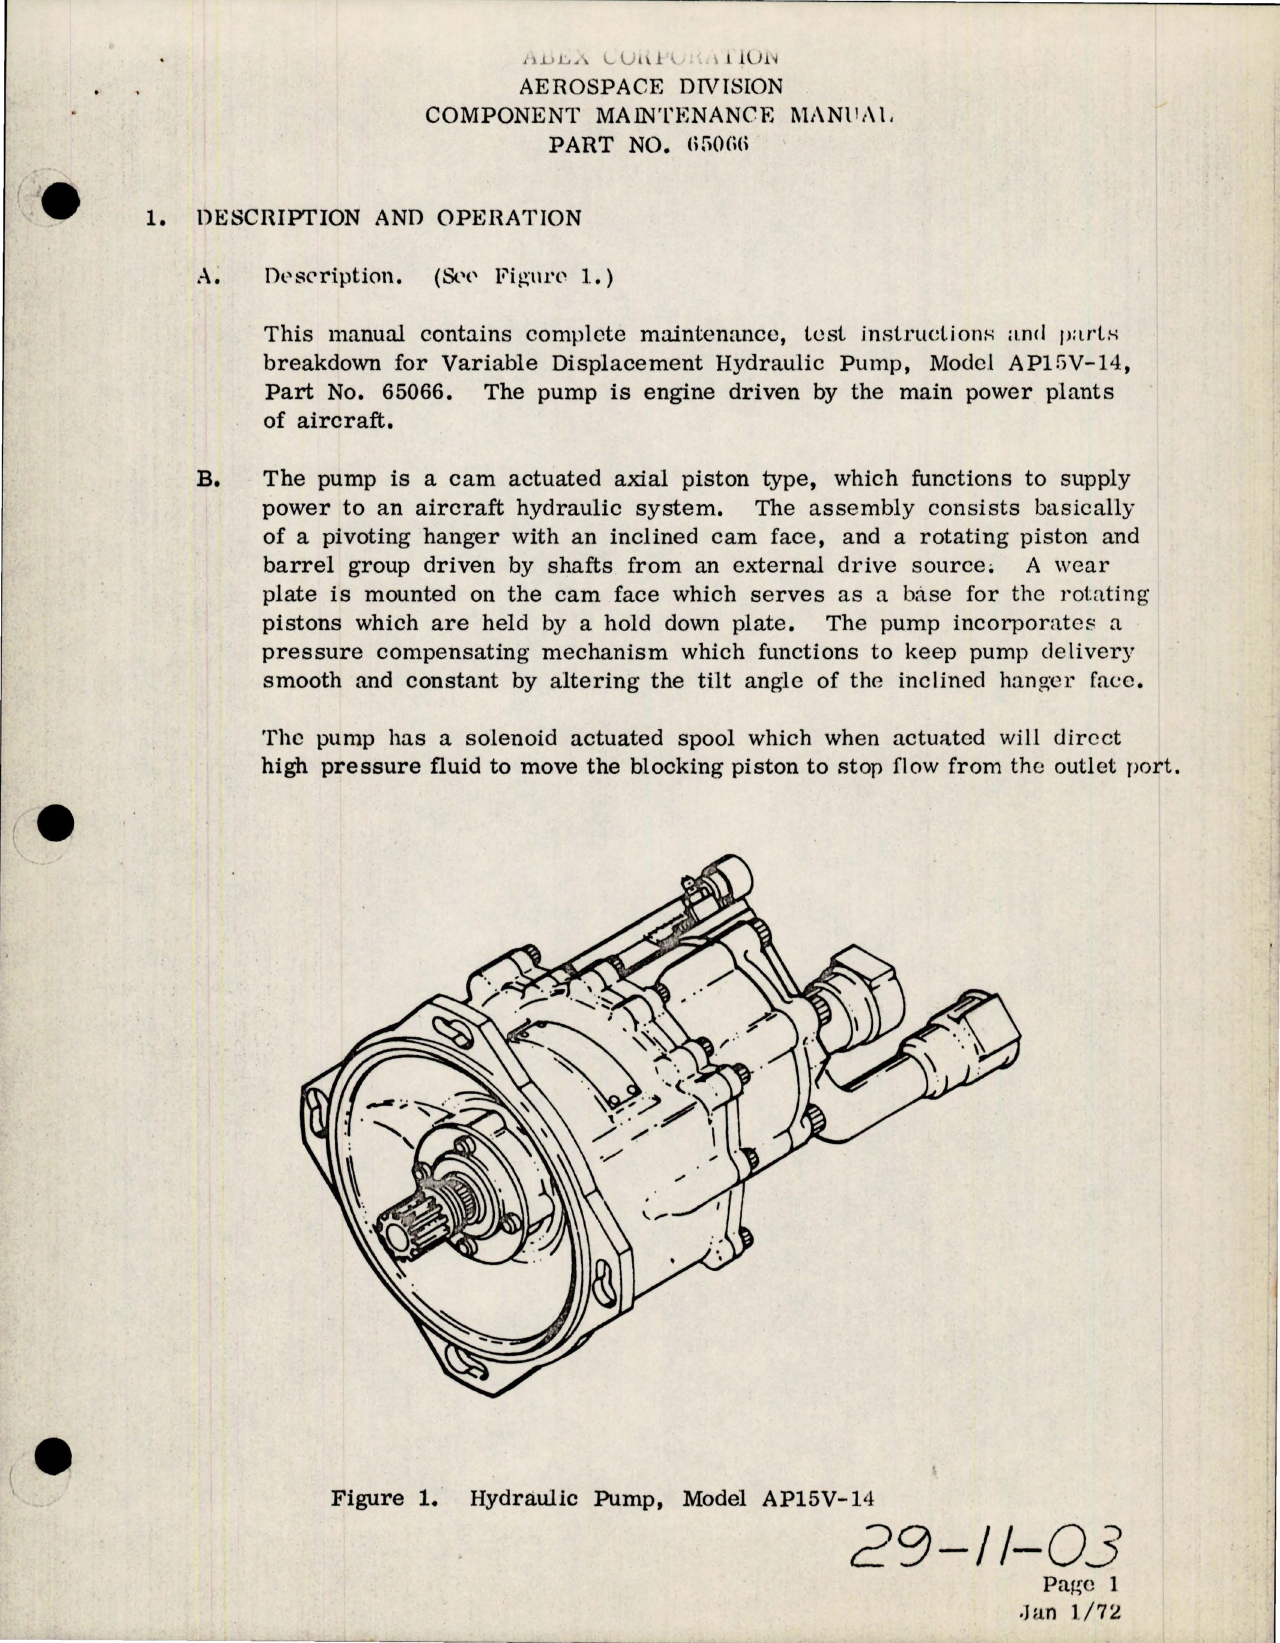 Sample page 7 from AirCorps Library document: Component Maintenance Manual for Hydraulic Pump - Part 65066 - Model AP15V-14 